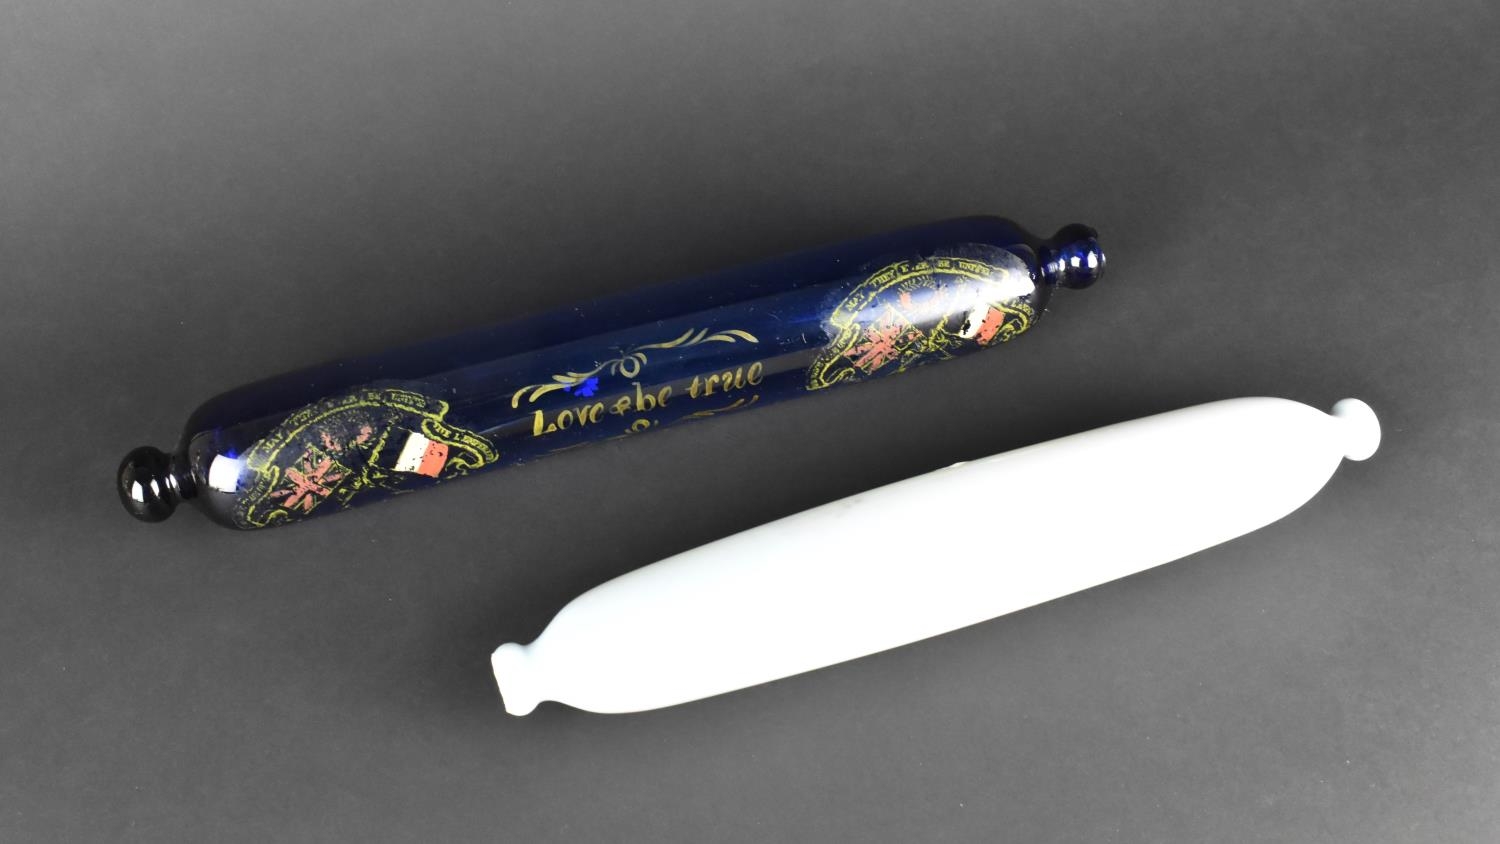 Two Ornamental Victorian Glass Rolling Pins, One Inscribed with French and British Flags, "May - Image 2 of 2